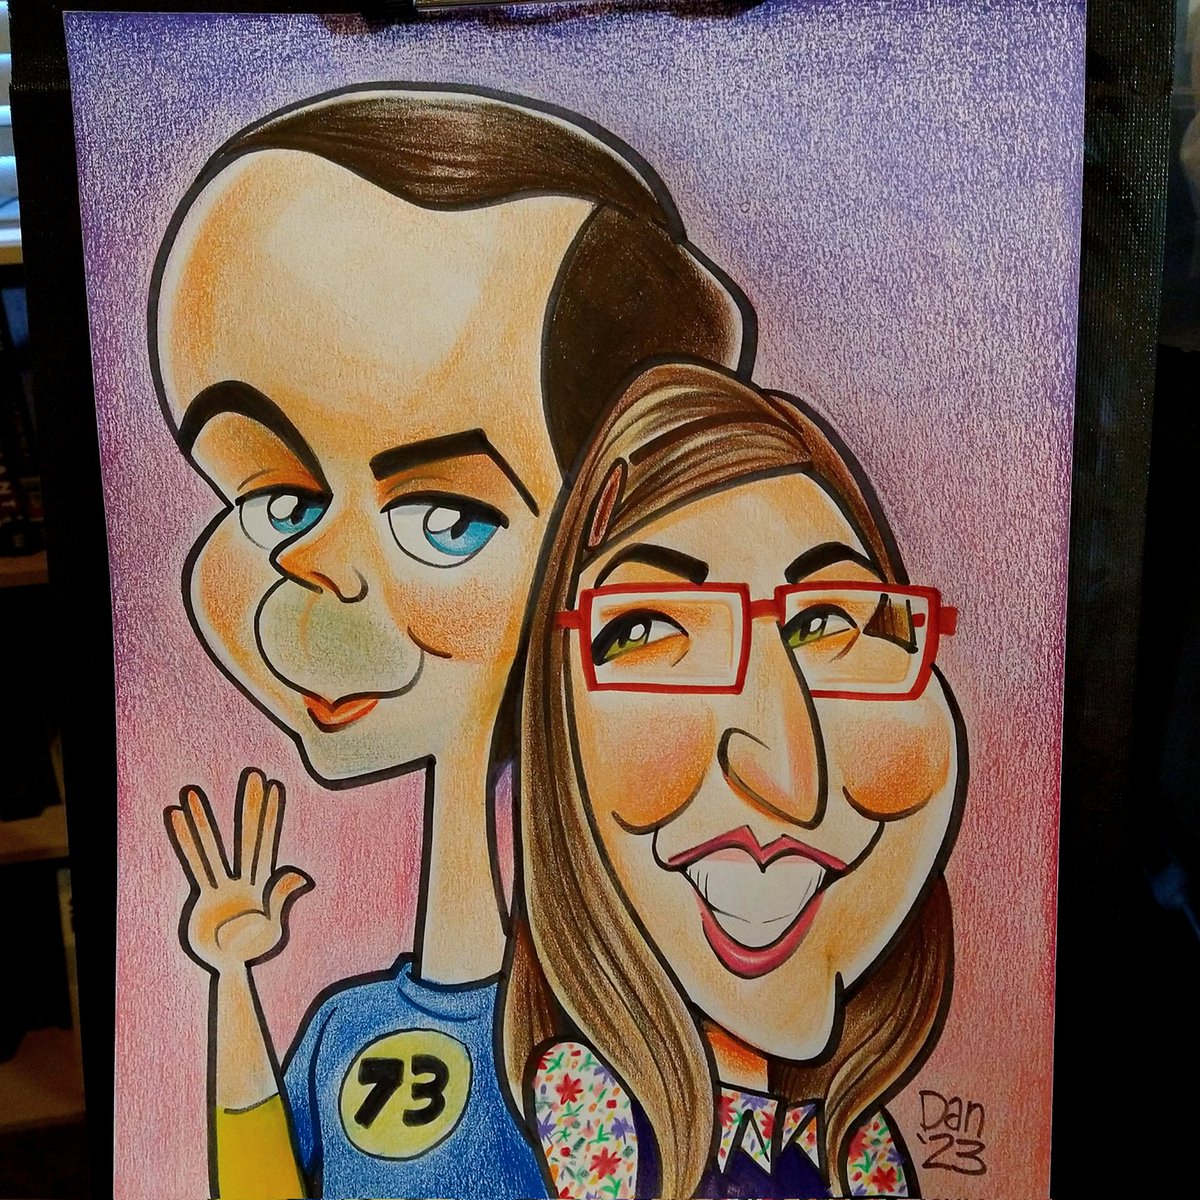 Happy Valentine's Day!  Rewatching The Big Bang Theory so thought I would celebrate with Sheldon and Amy. I drew them a few years ago, but it was nice to update it #bigbangtheory #sheldoncooper #amyfarrahfowler #jimparsons #mayimbialik #caricature #cartoon #doodle